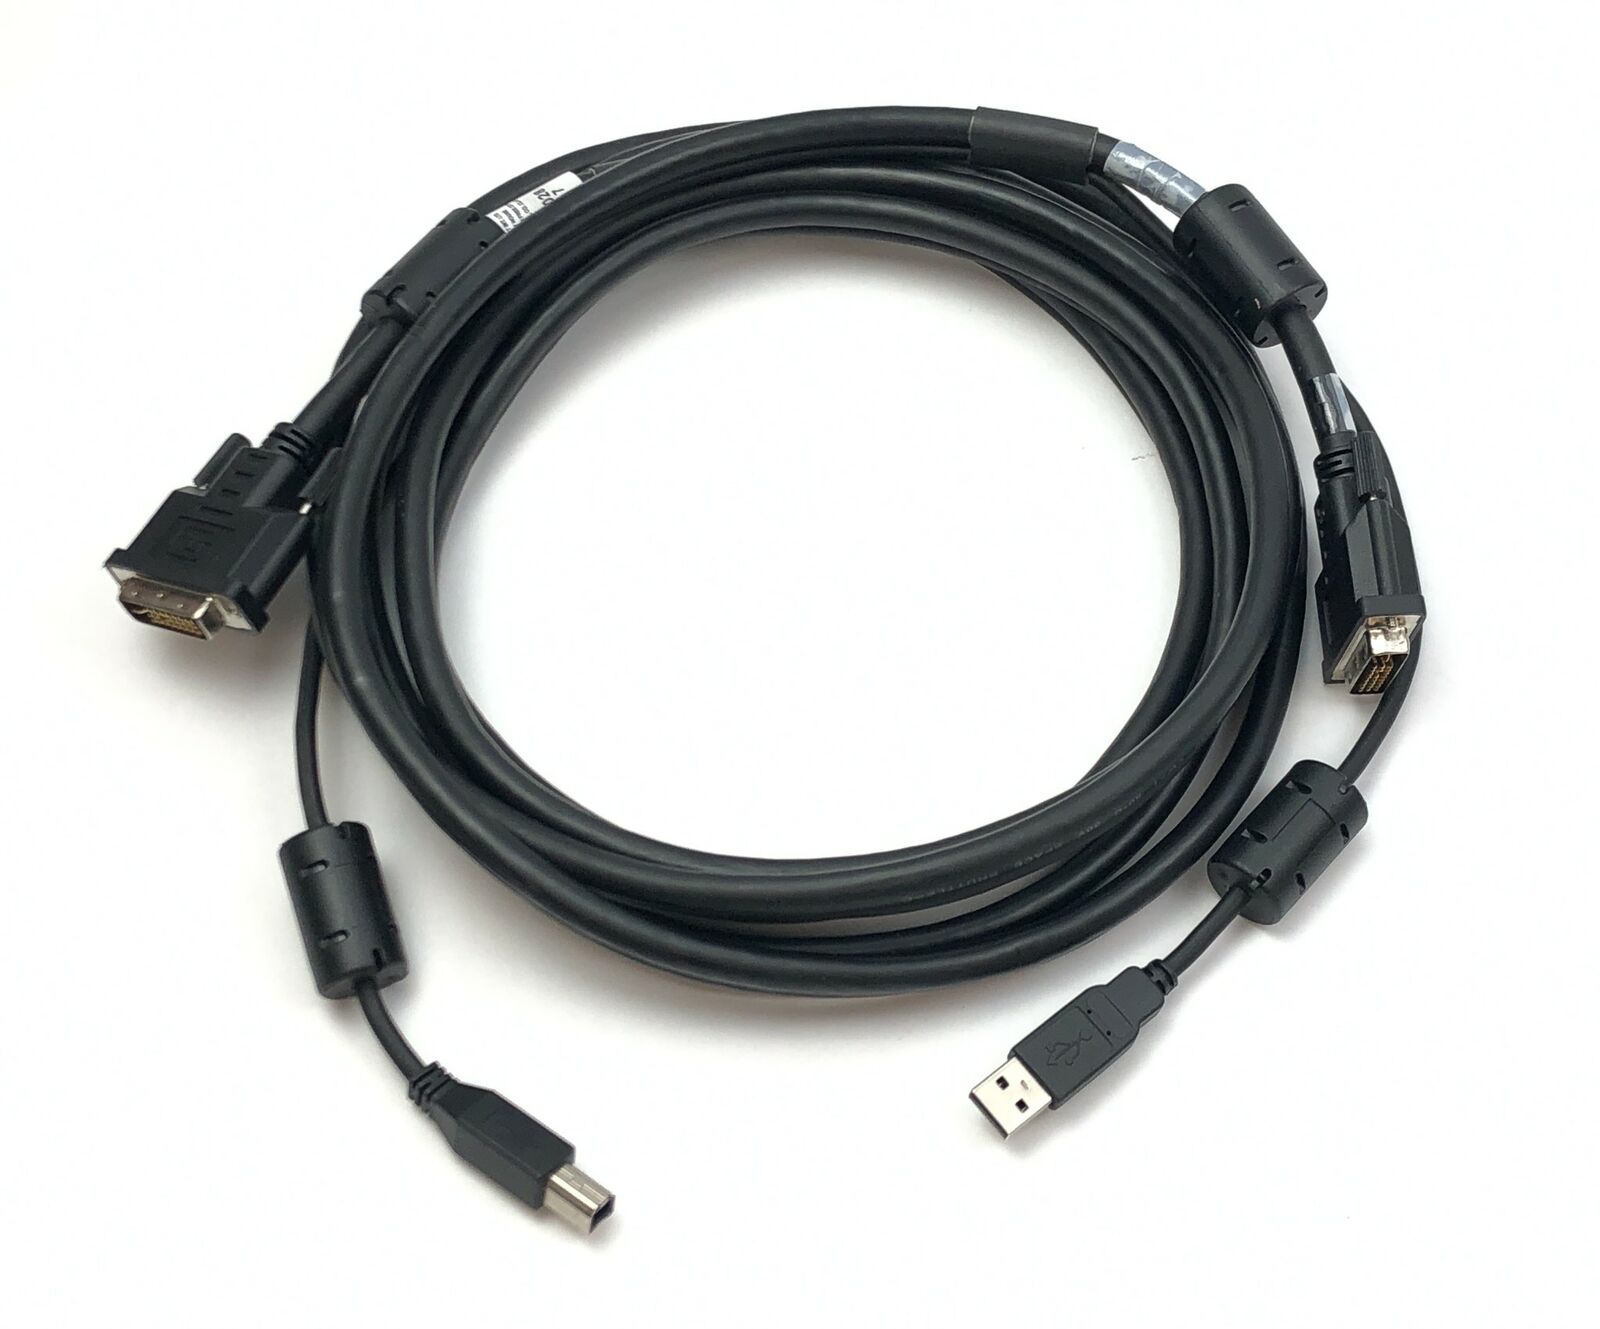 Avocent Combo Cable Black for Switch View KVM 12ft CBL0028